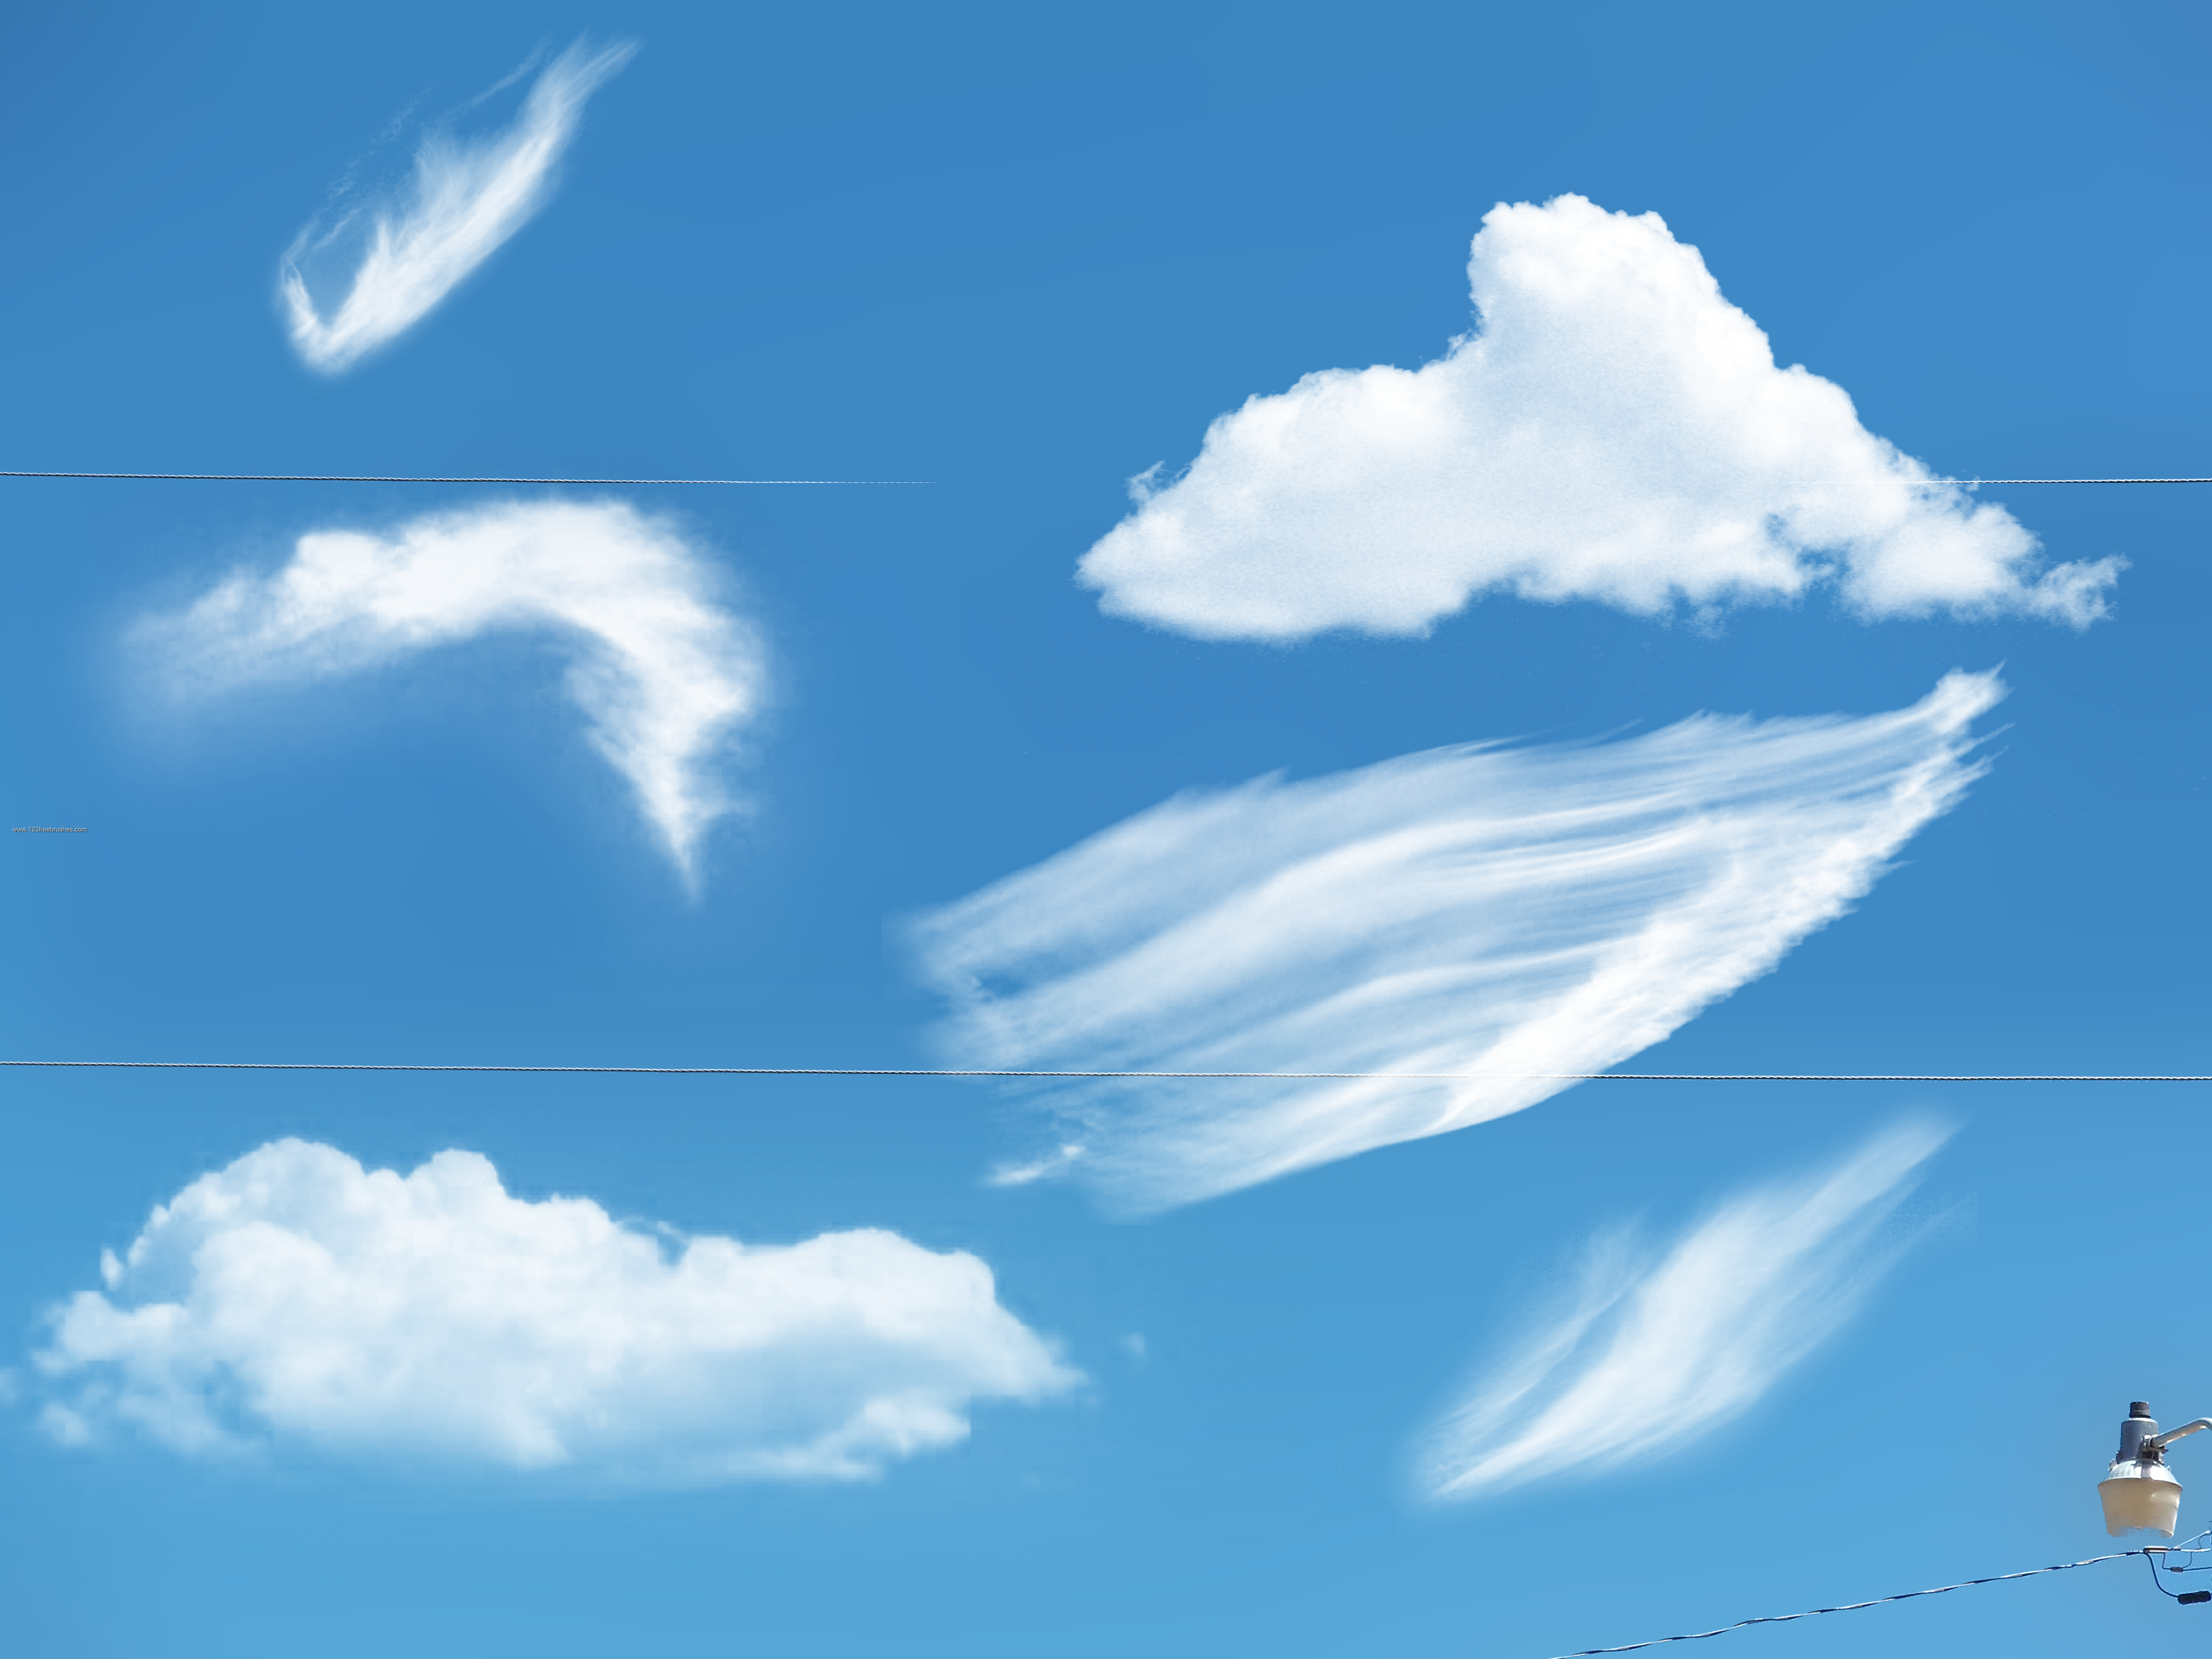 Clouds | Brushes For Photoshop Cs5 Free | 123Freebrushes